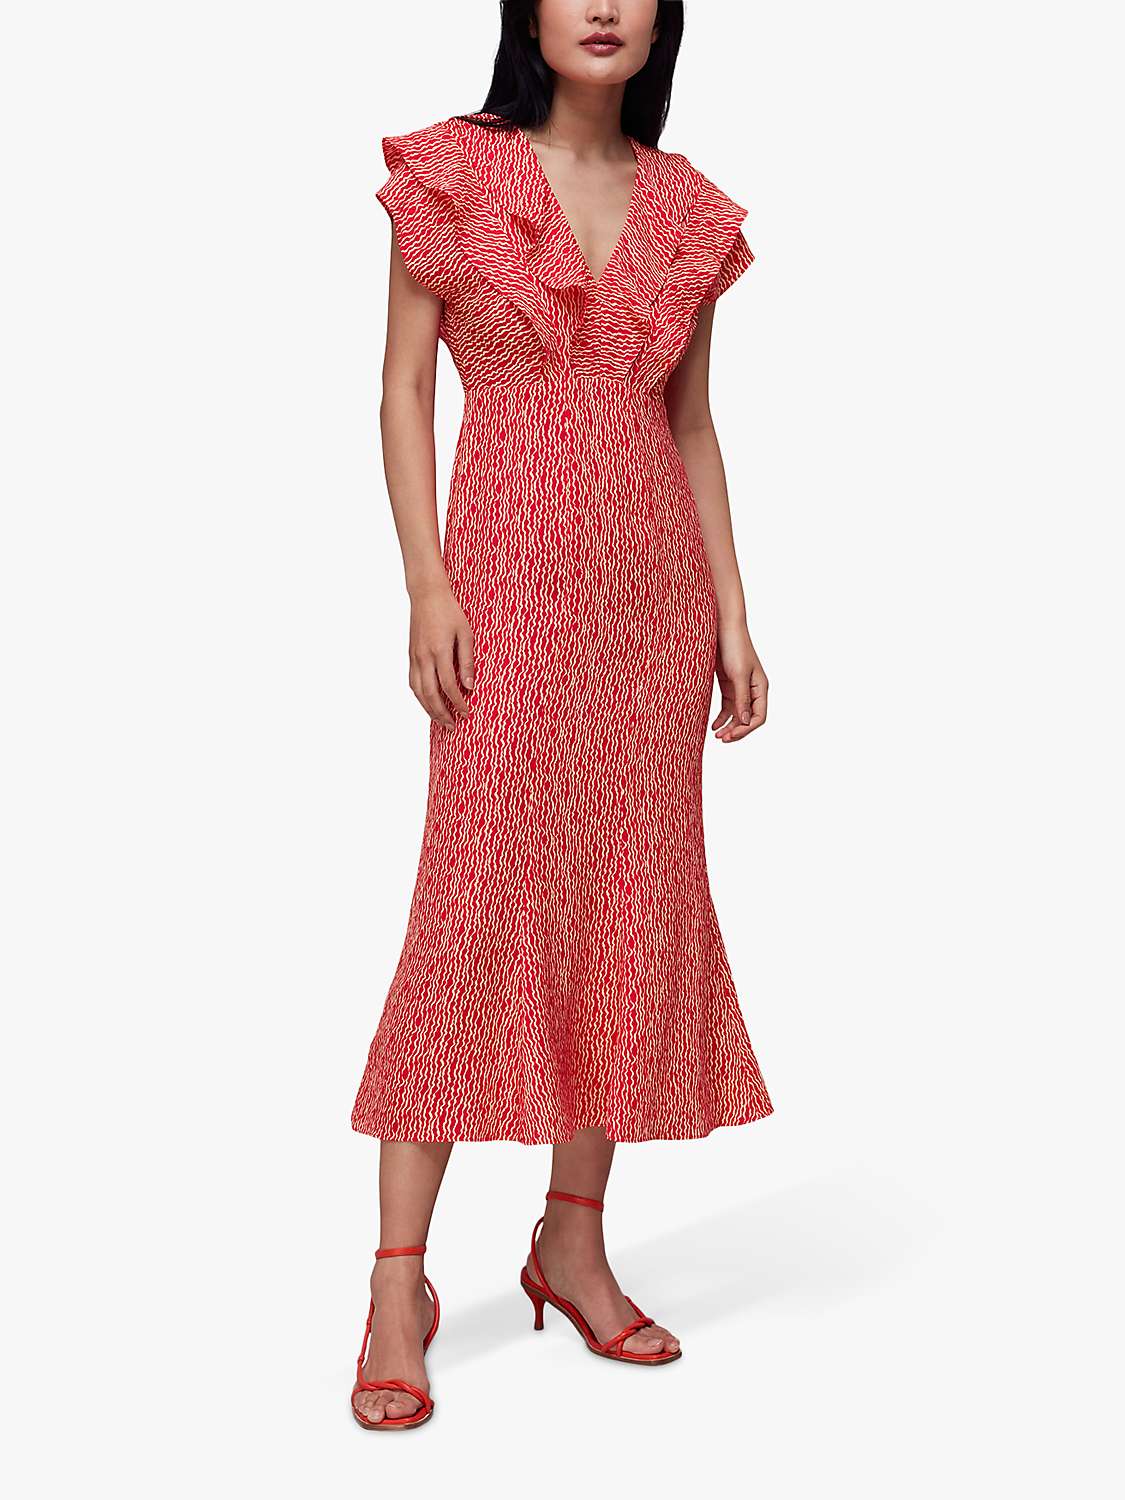 Buy Whistles Wiggly Lines Adeline Midi Dress, Red/Multi Online at johnlewis.com